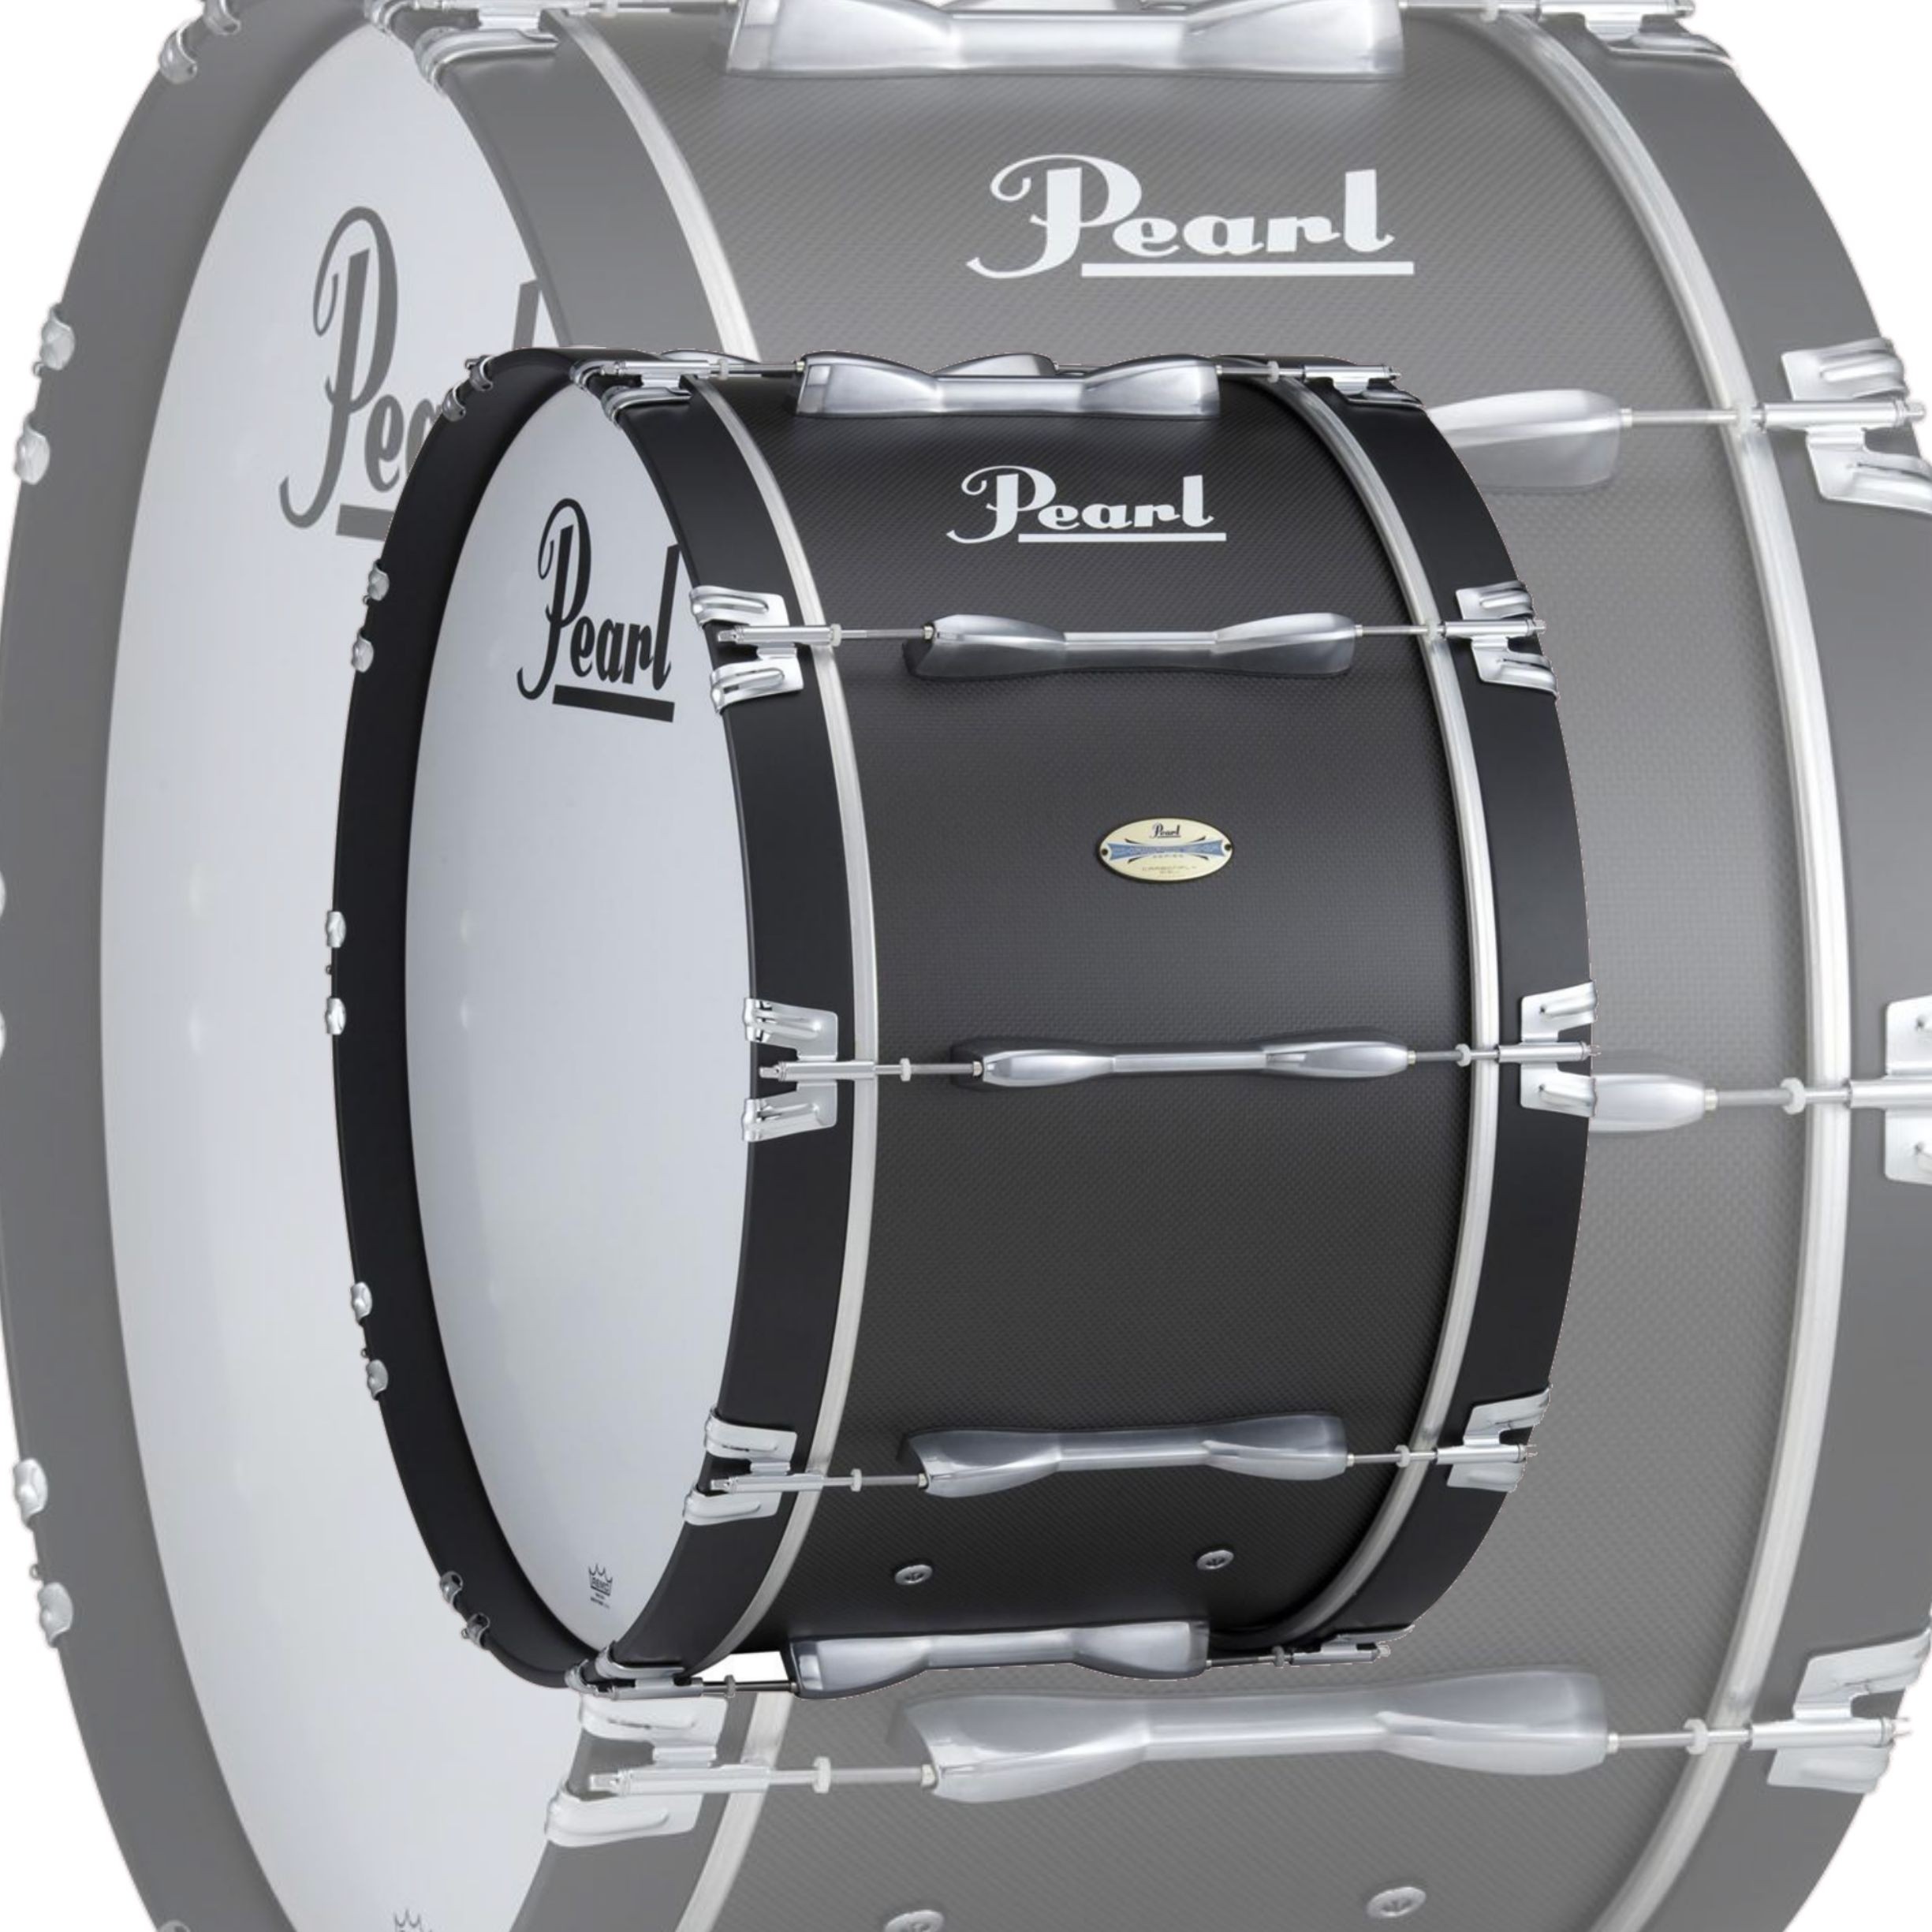 Pearl CarbonPly Championship 16"x14"  Marching Bass Drum